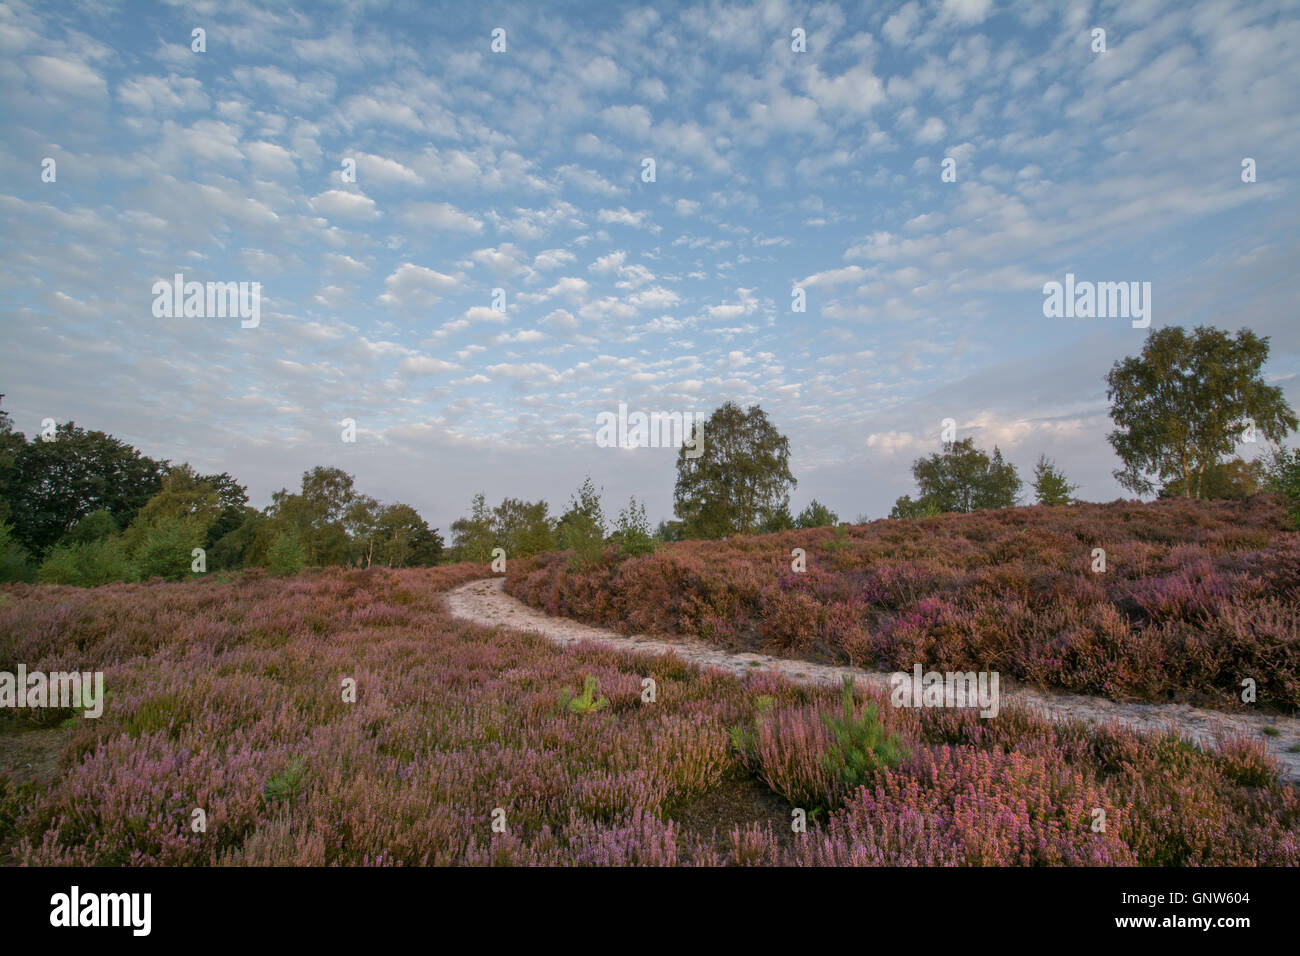 Landscape view over Witley Common, Surrey, England, in summer with heather in flower. Surrey Hills Area of Outstanding Natural Beauty. Stock Photo